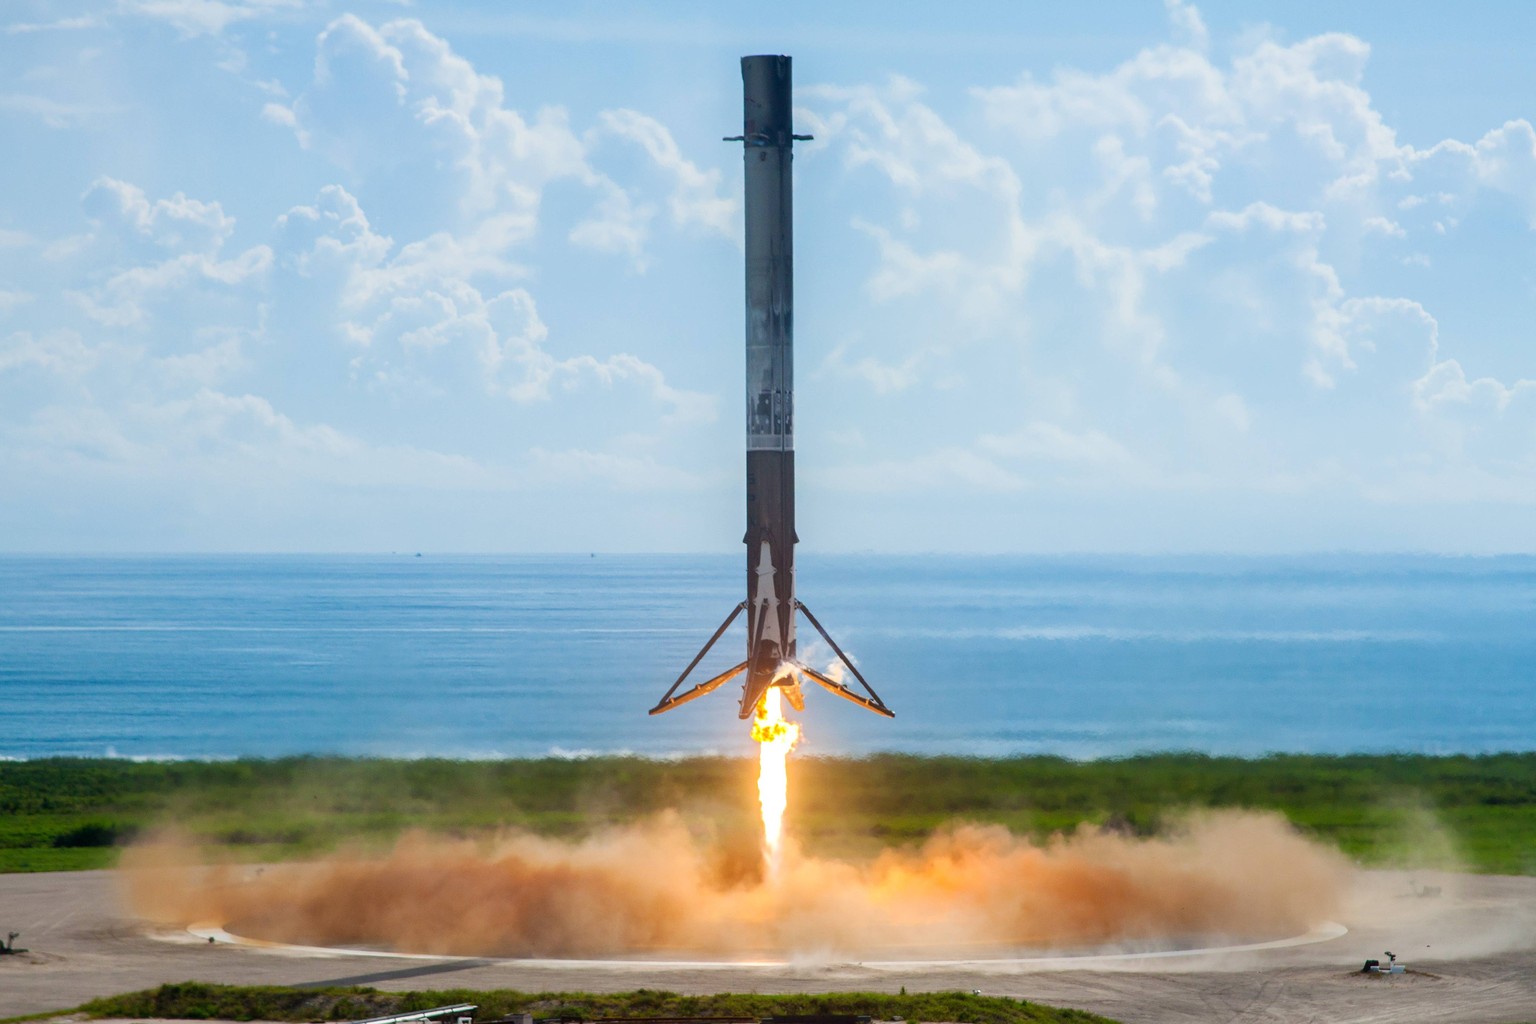 September 7, 2017 - Cape Canaveral, FL, United States of America - The SpaceX Falcon 9 first stage rocket lands after carrying the U.S. Air Force X-37B spaceplane into orbit at the Cape Canaveral Spac ...